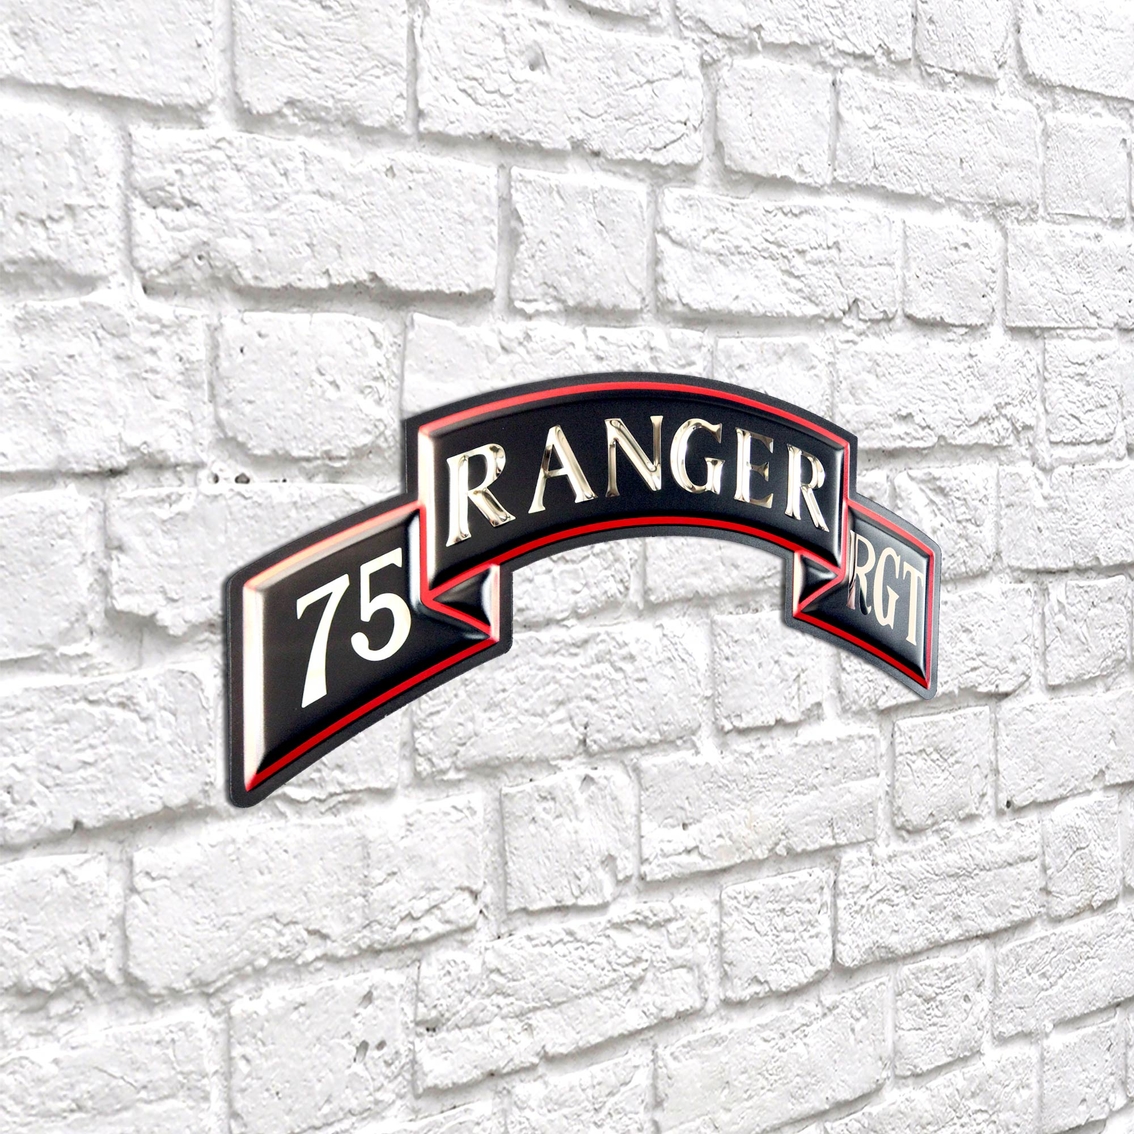 Chrome Domz Army Rangers 75th Embossed Wall Art Scroll - Image 3 of 3